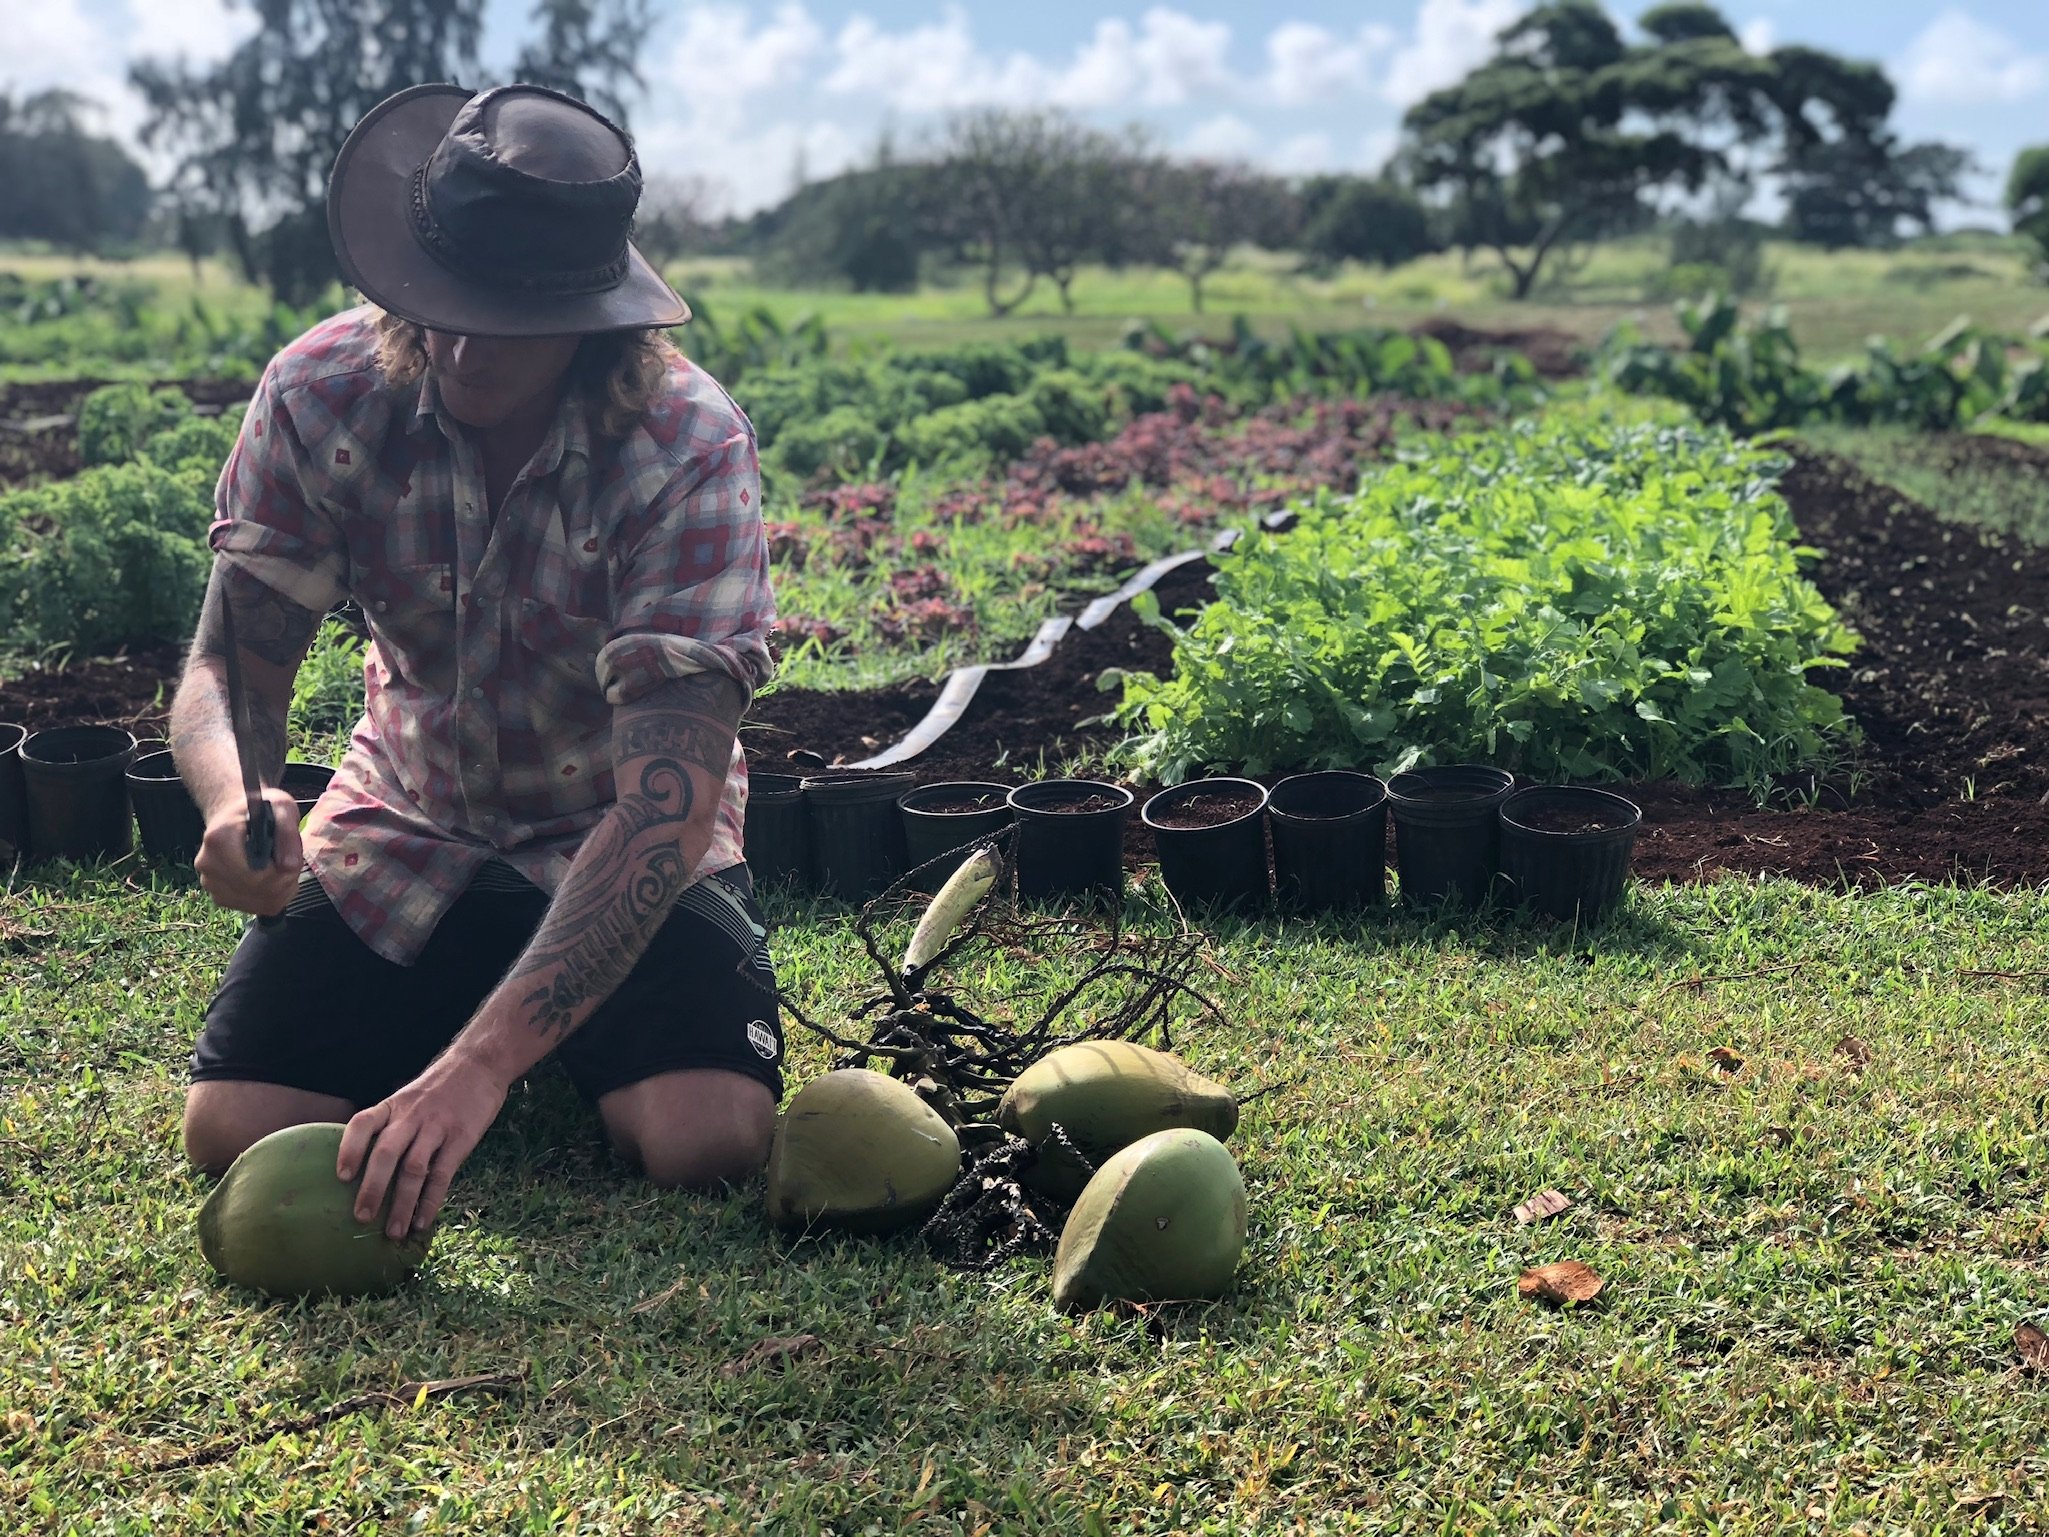  Adventures abound at Timbers Kaua‘i. Choose from a day at the beach—boards, chairs, refreshments and umbrella provided—a bike ride on one (or all) of the property’s trails, or a visit to The Farm at Hōkūala, where you can harvest produce for a pri